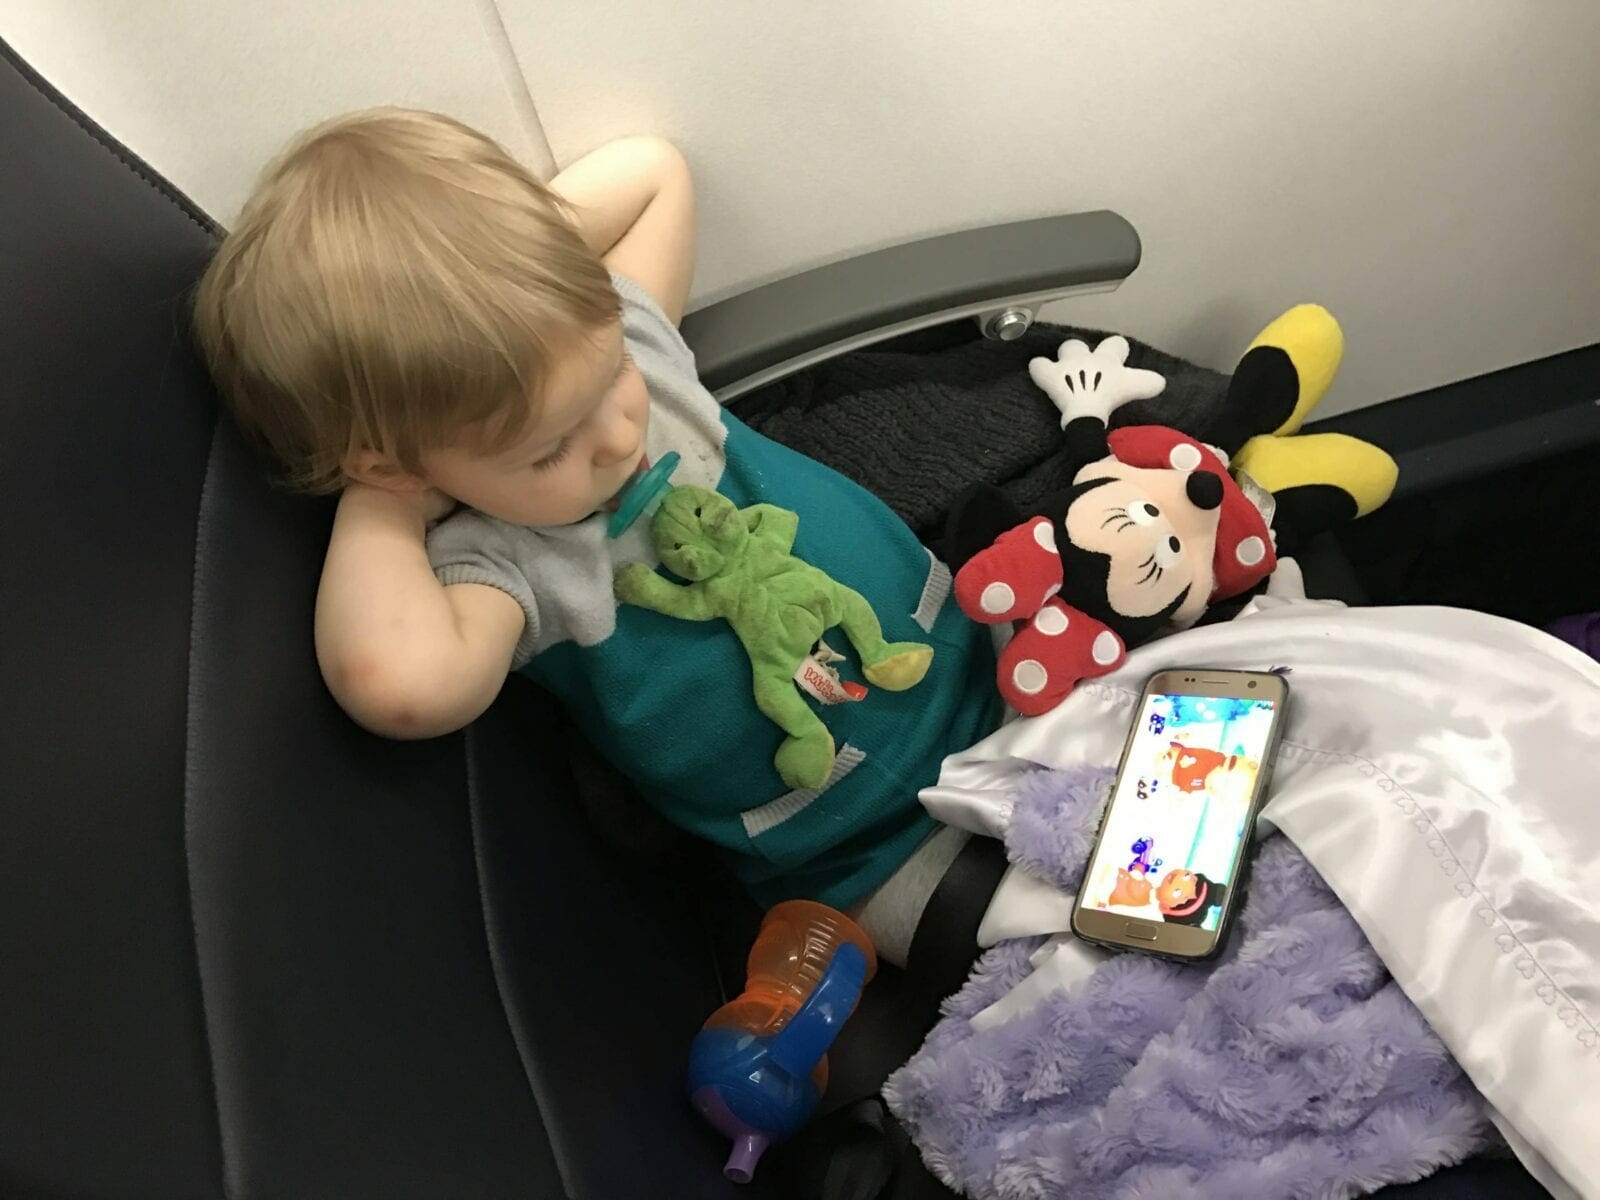 Child in airplane seat with Minnie Mouse image.